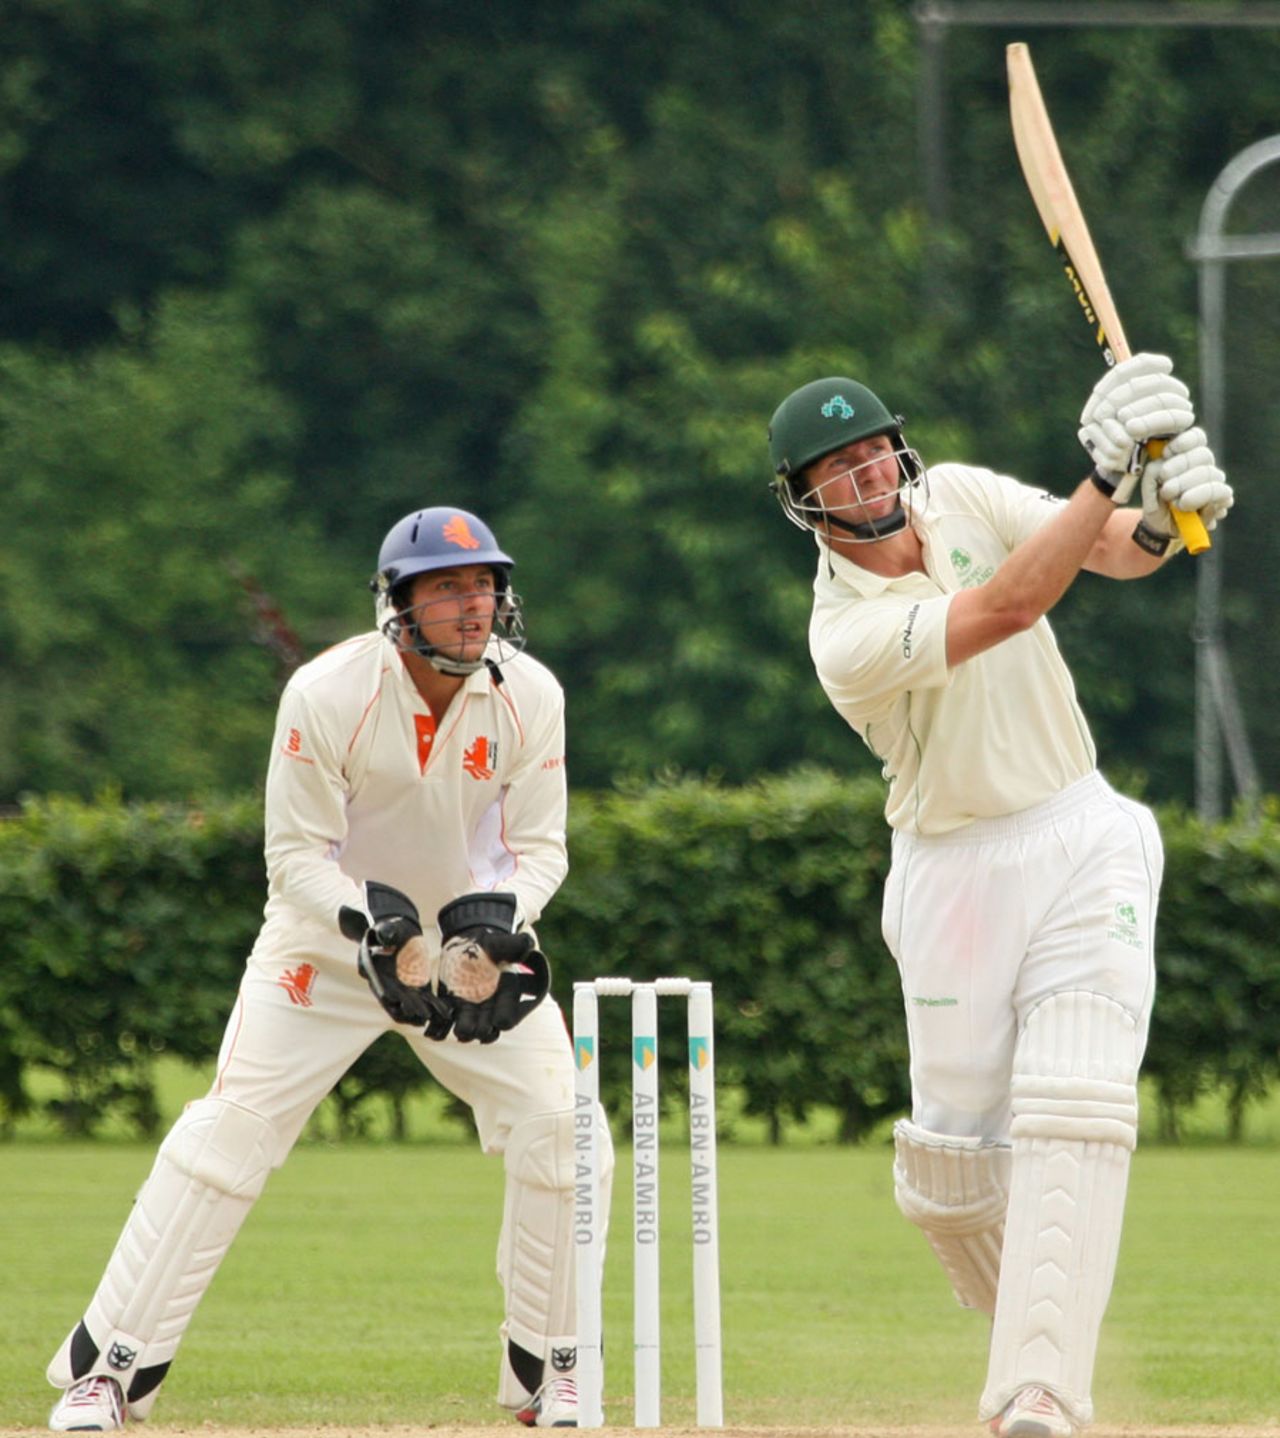 Andrew White plays a lofted shot in his innings of 62, Netherlands v Ireland, ICC Intercontinental Cup, 3rd day, Deventer, July 3, 2013